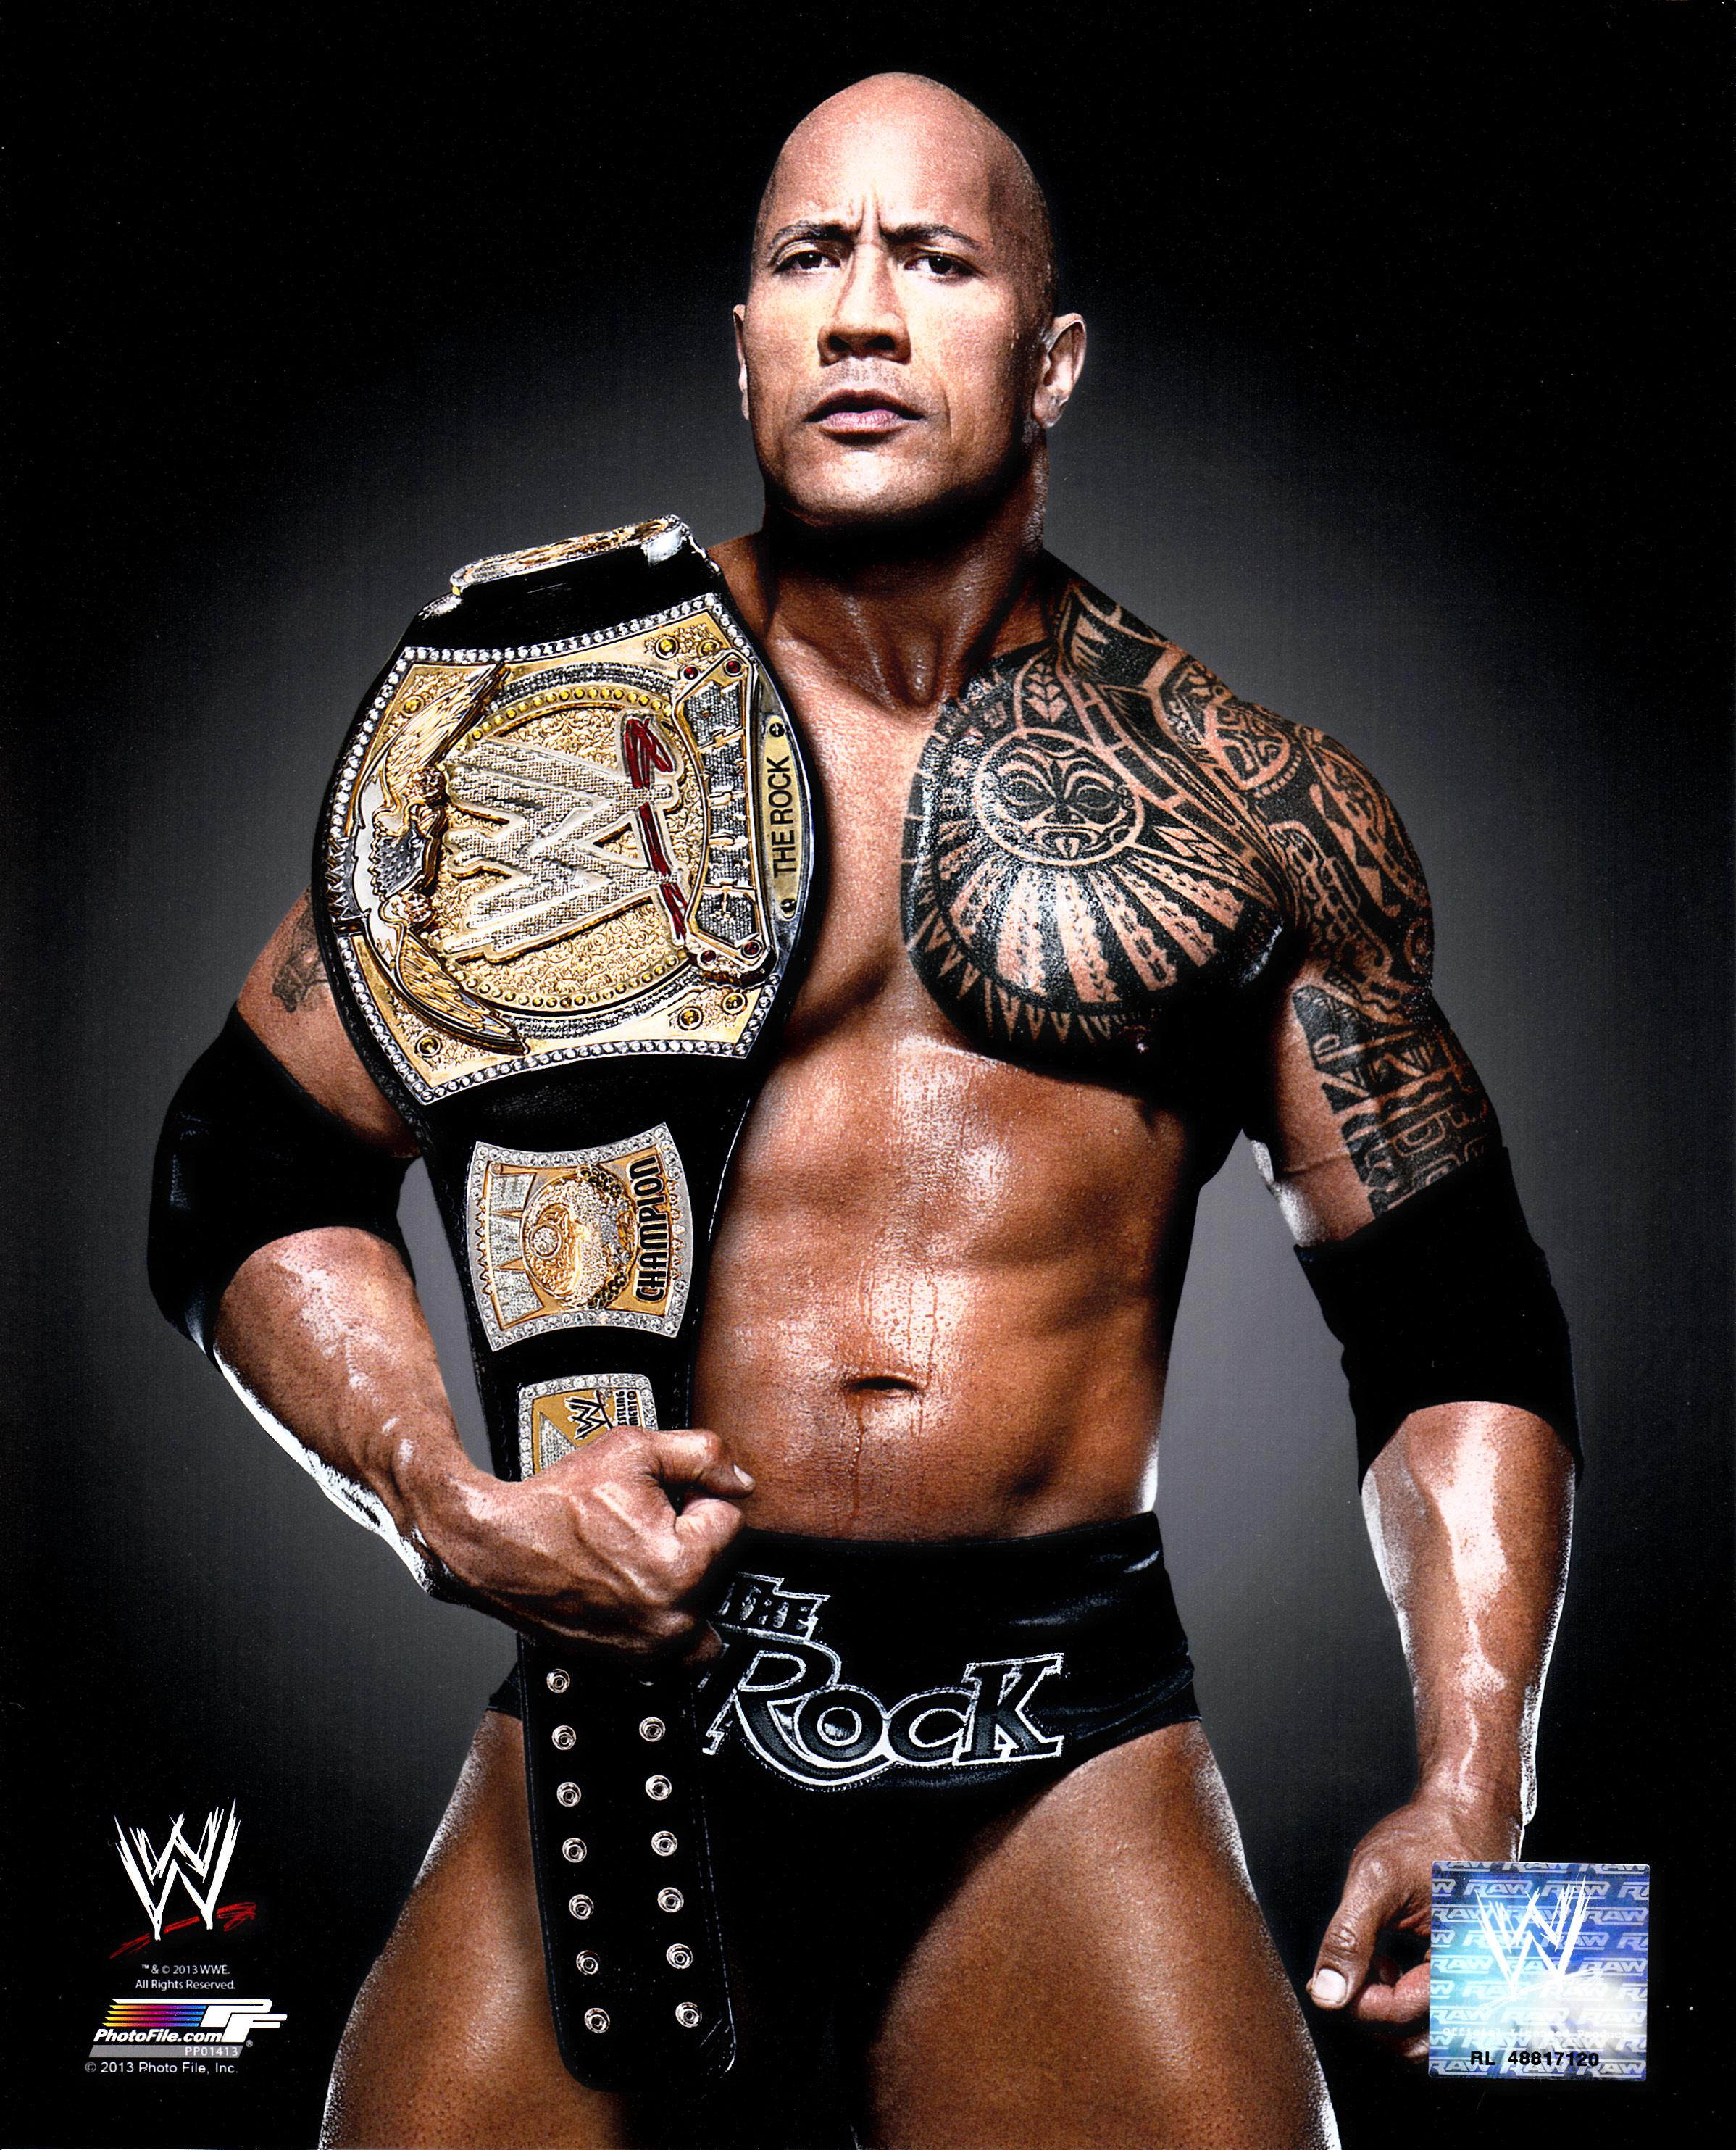 The Rock Vs John Cena Top and High Quality HD Wallpapers and other